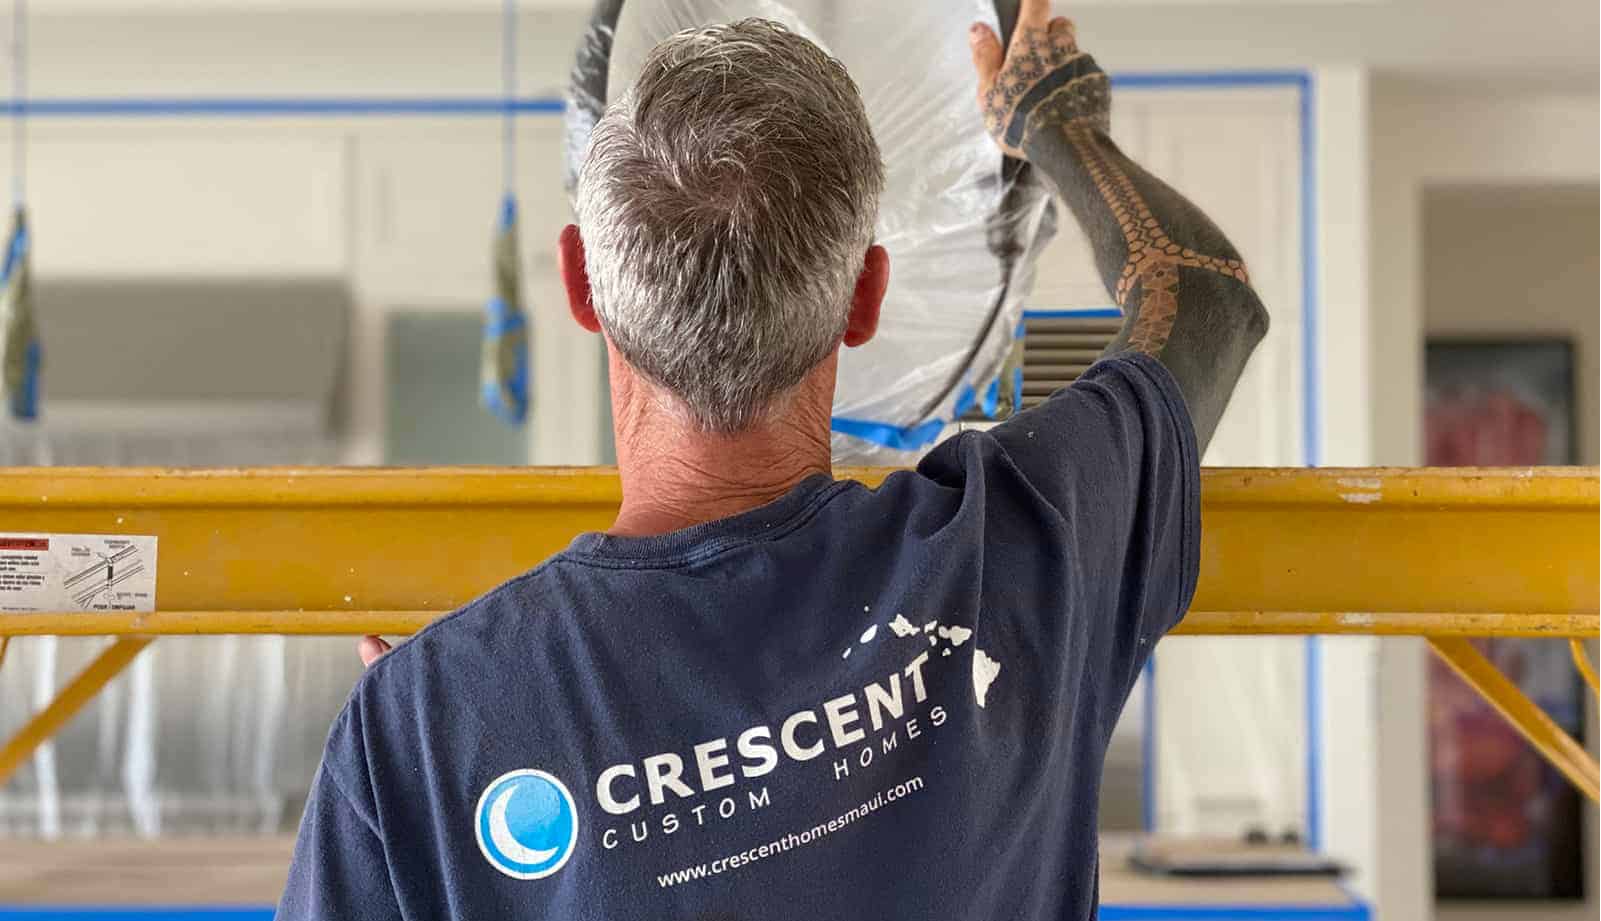 Crescent Homes Maui worker remodeling a client's home